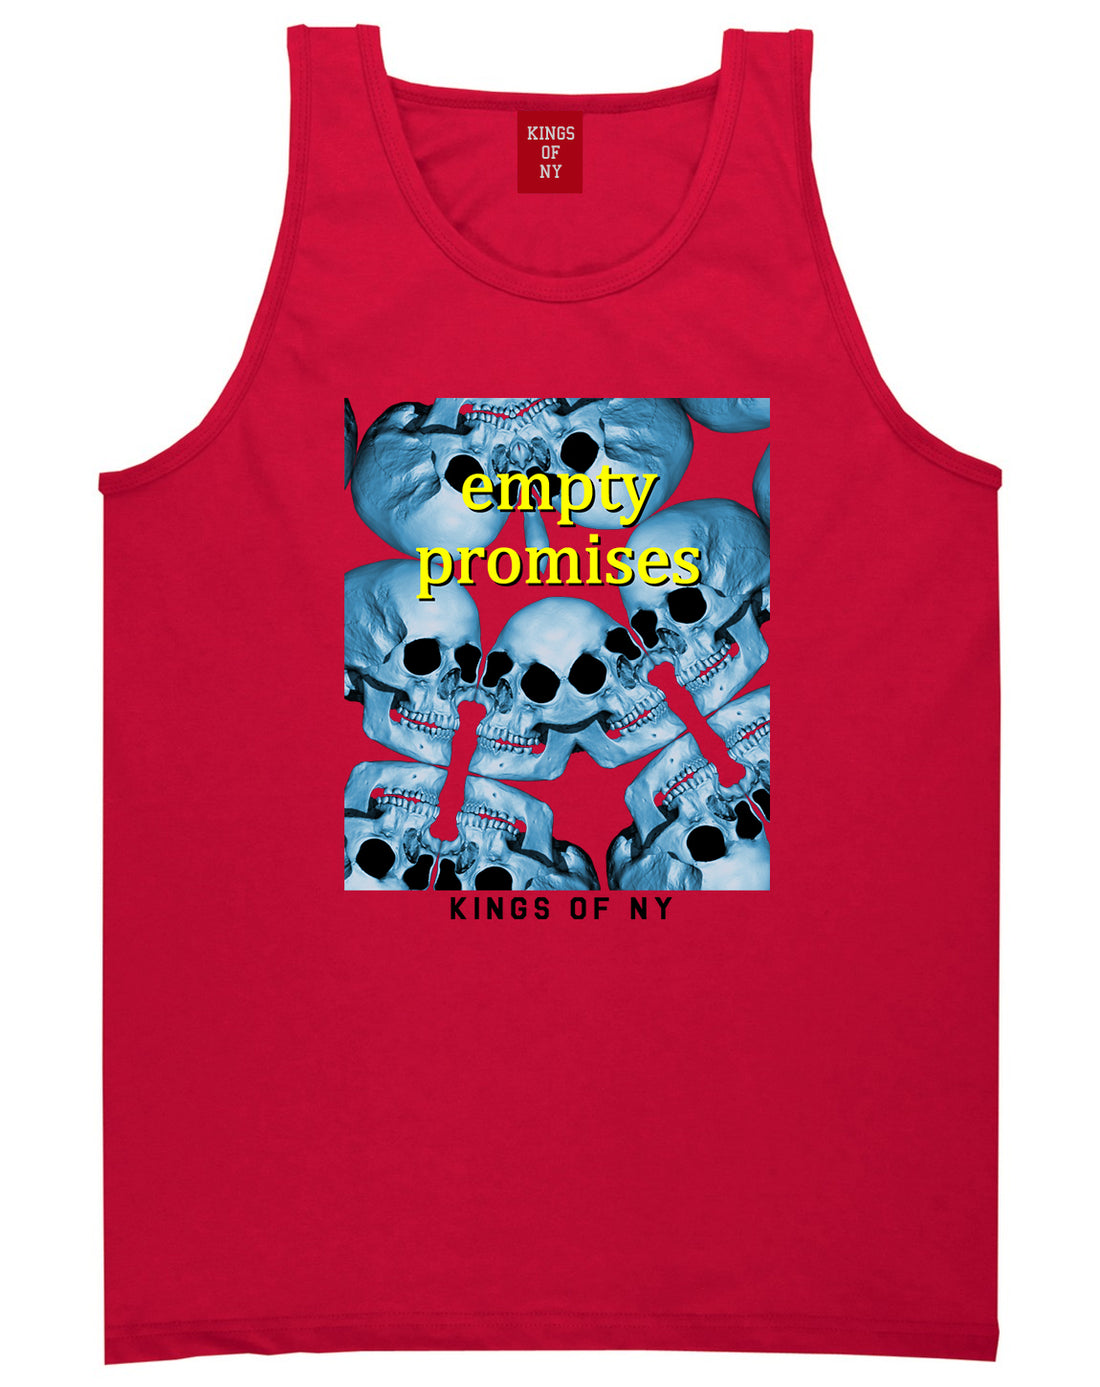 Empty Promises Mens Tank Top Shirt Red by Kings Of NY